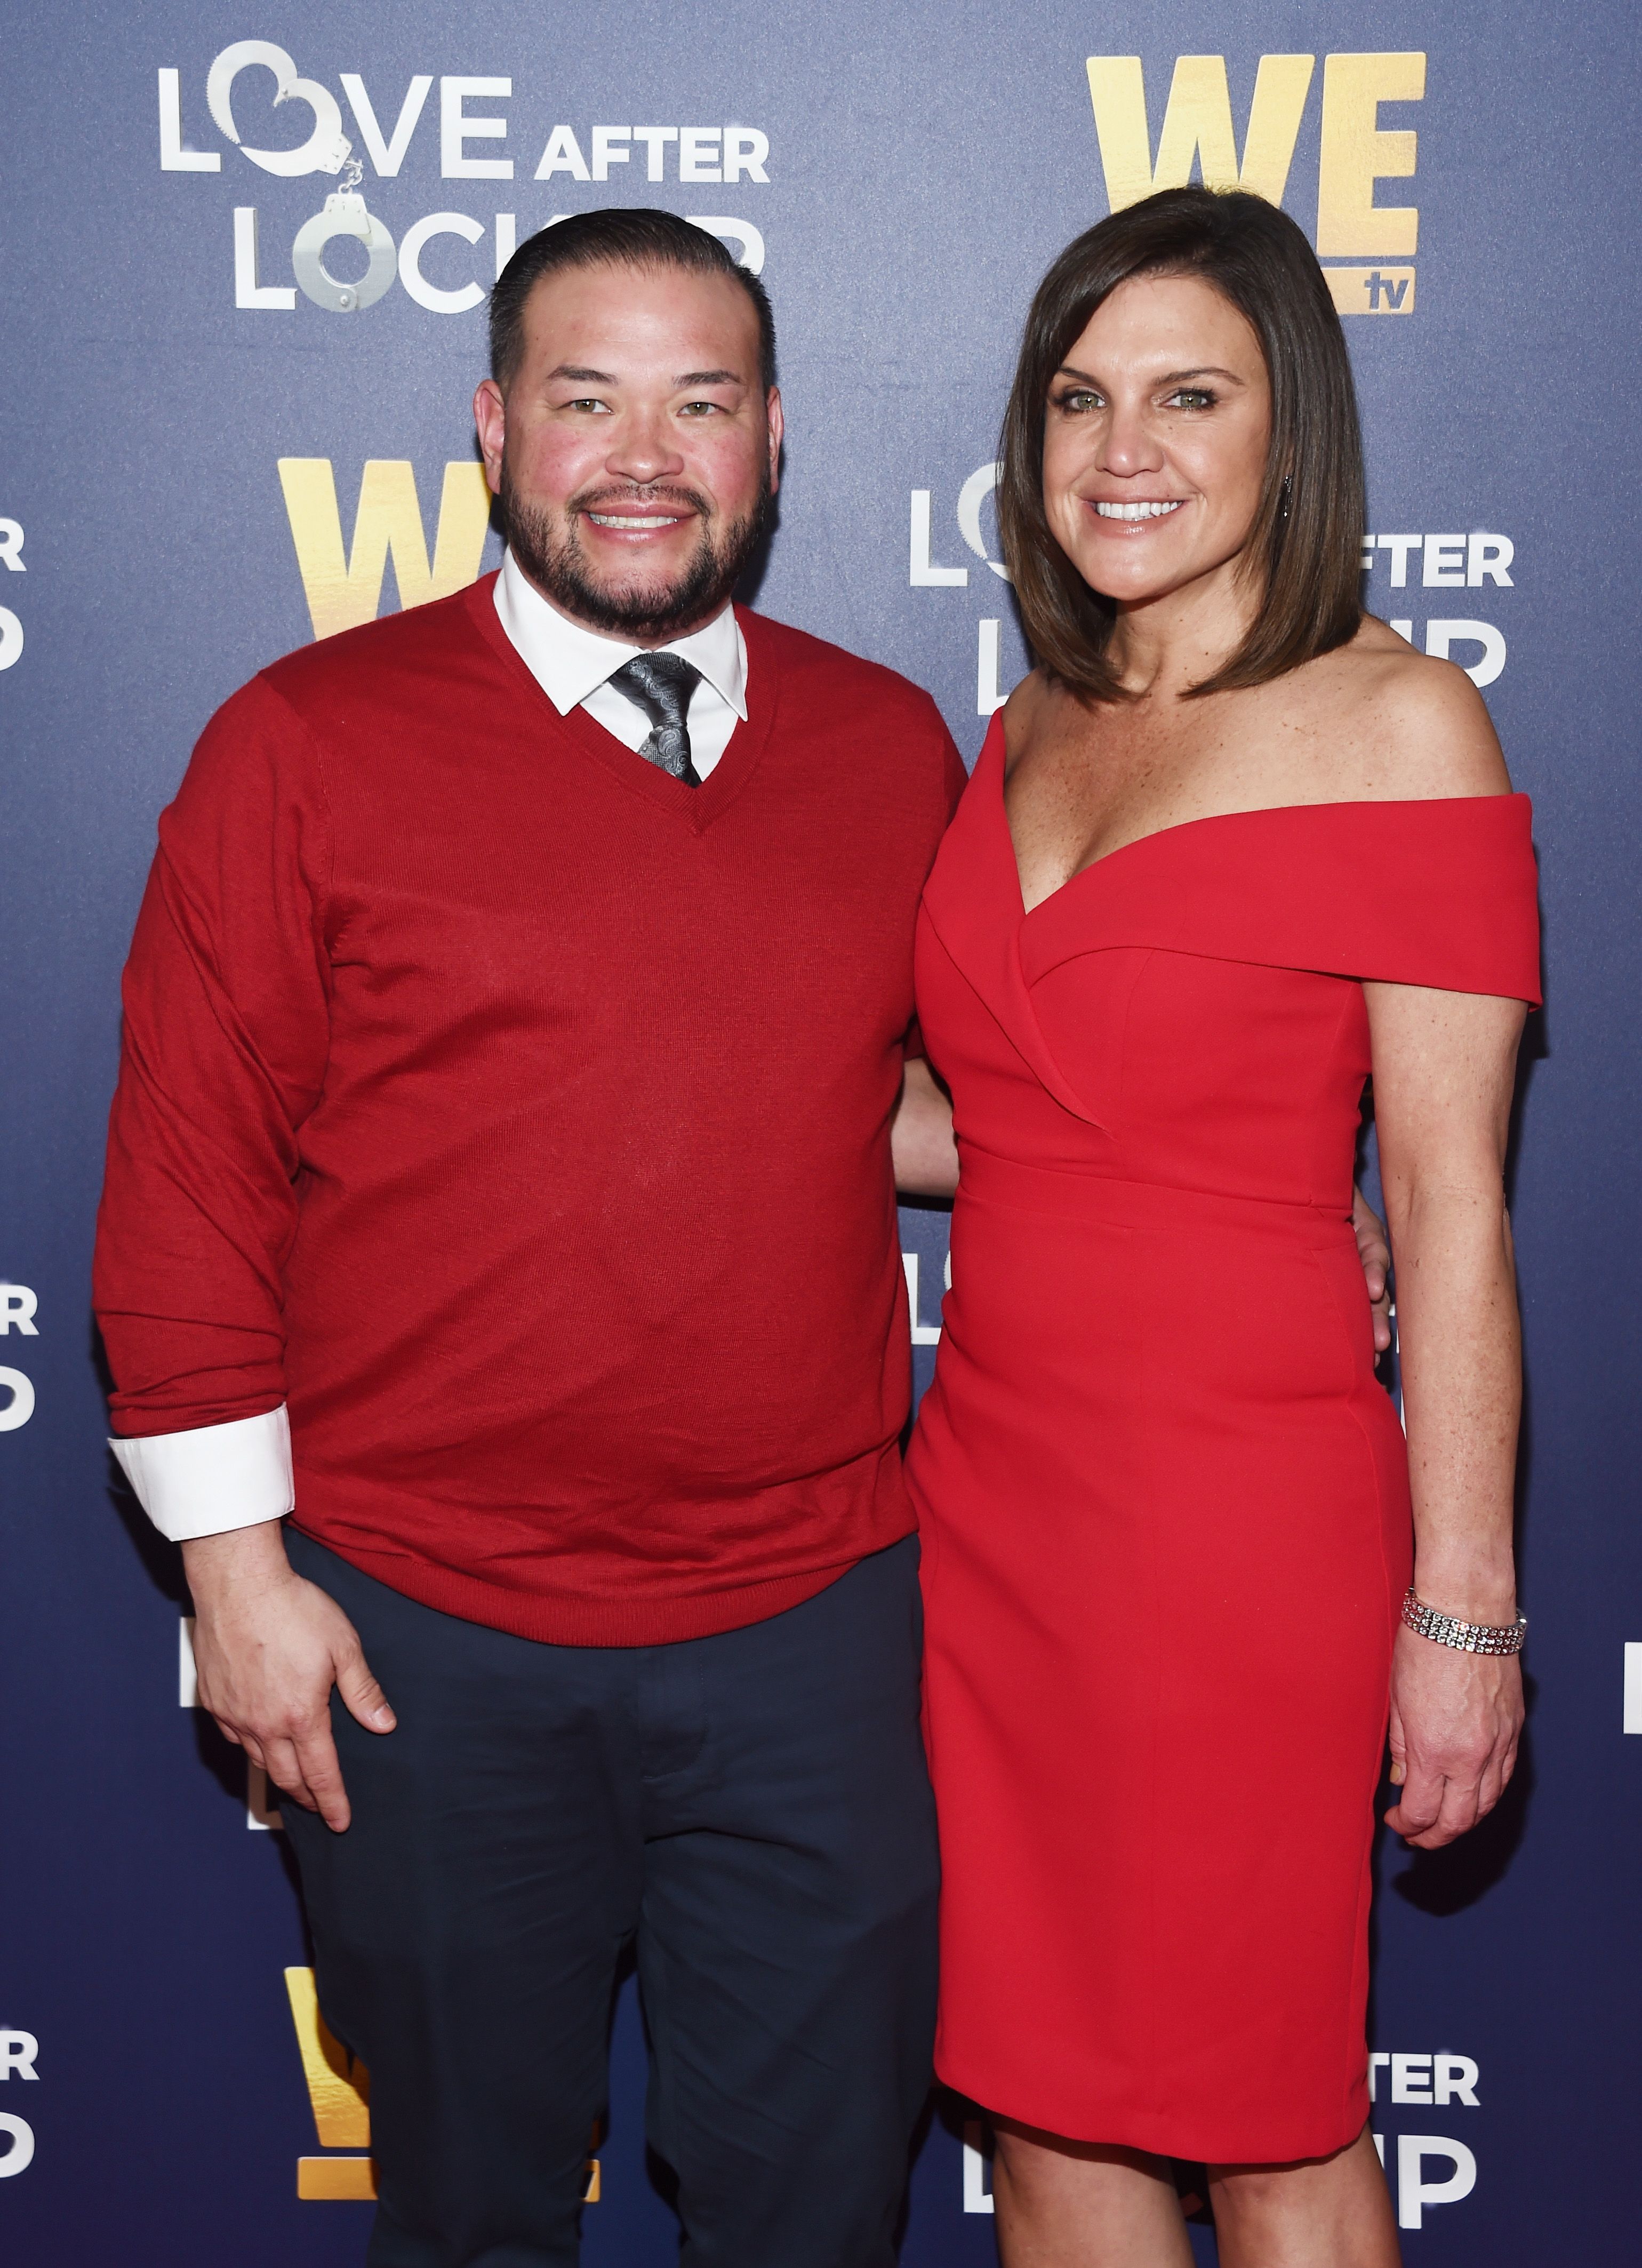 Jon Gosselin and Colleen Conrad during the WE tv's Real Love: Relationship Reality TV's Past, Present & Future event at The Paley Center for Media on December 11, 2018 in Beverly Hills, California. | Source: Getty Images